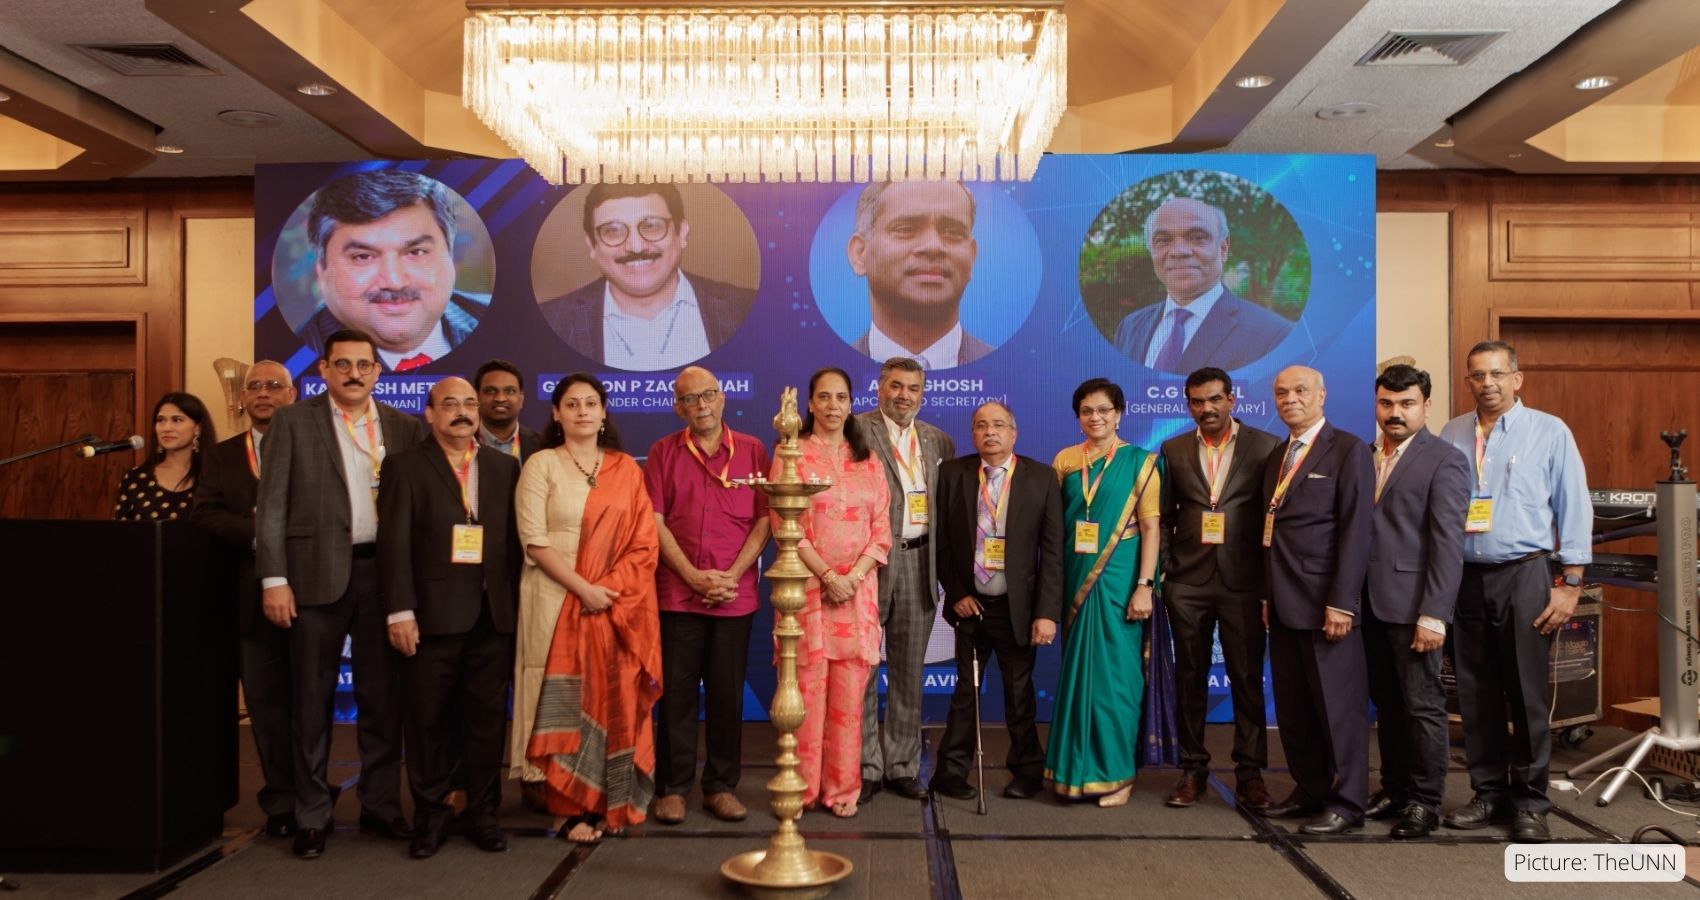 Indo-American Press Club’s 9th International Media Conference Held In Stamford, CT